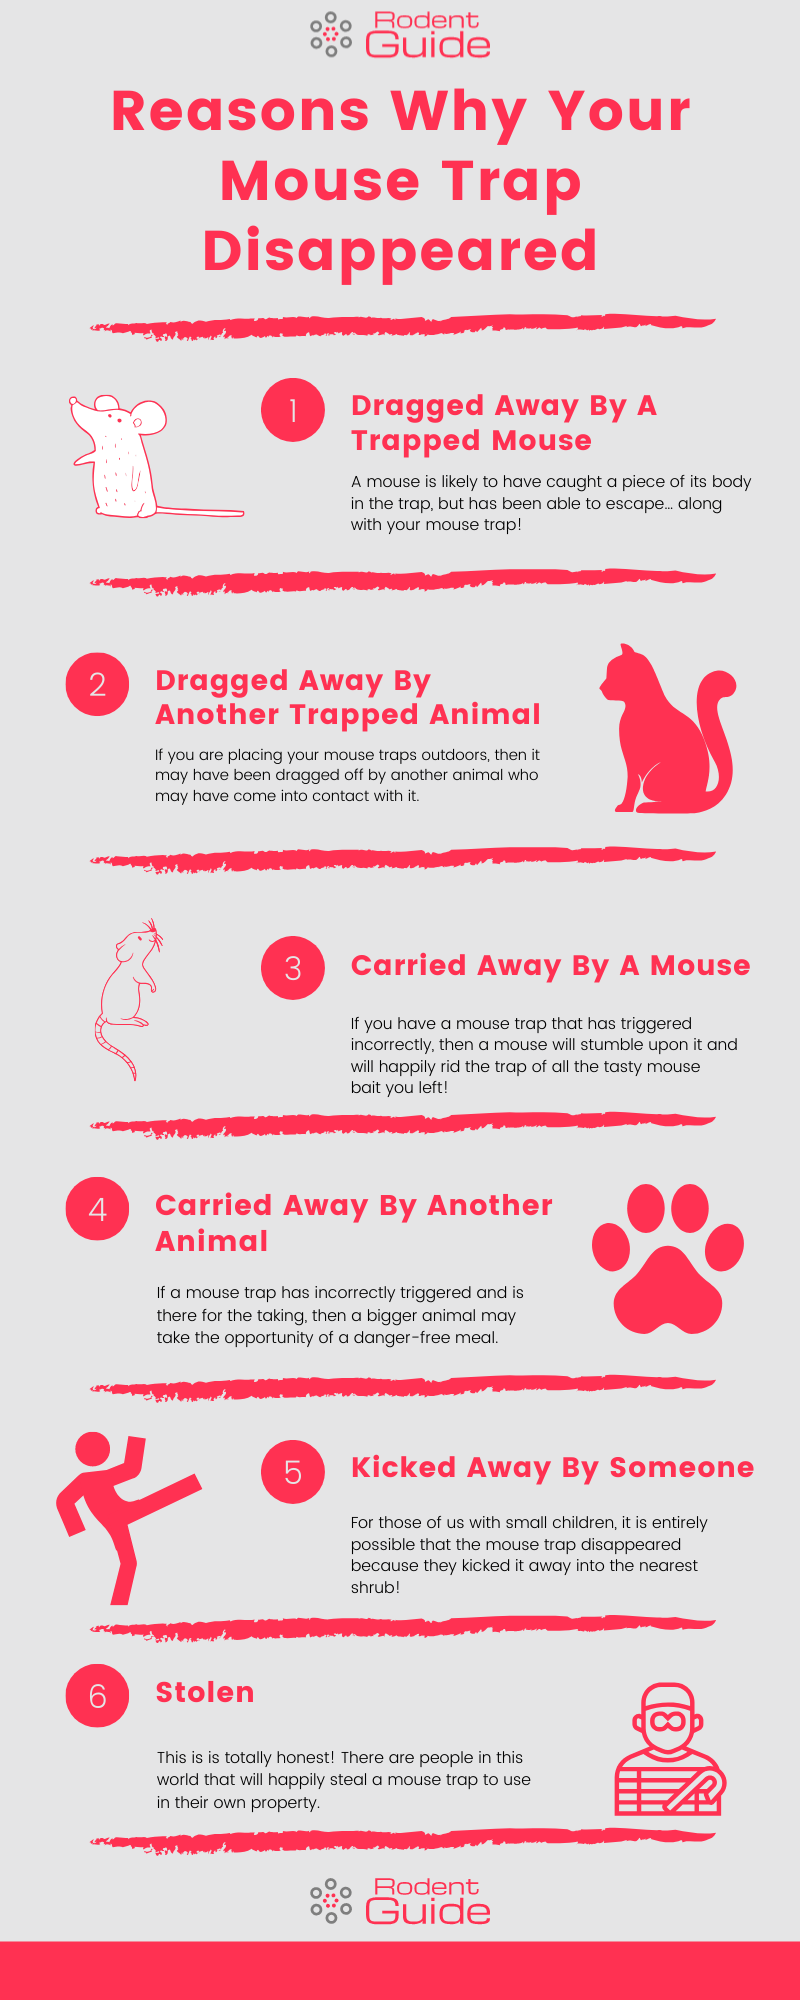 Reasons Why Your Mouse Trap Disappeared Infographic